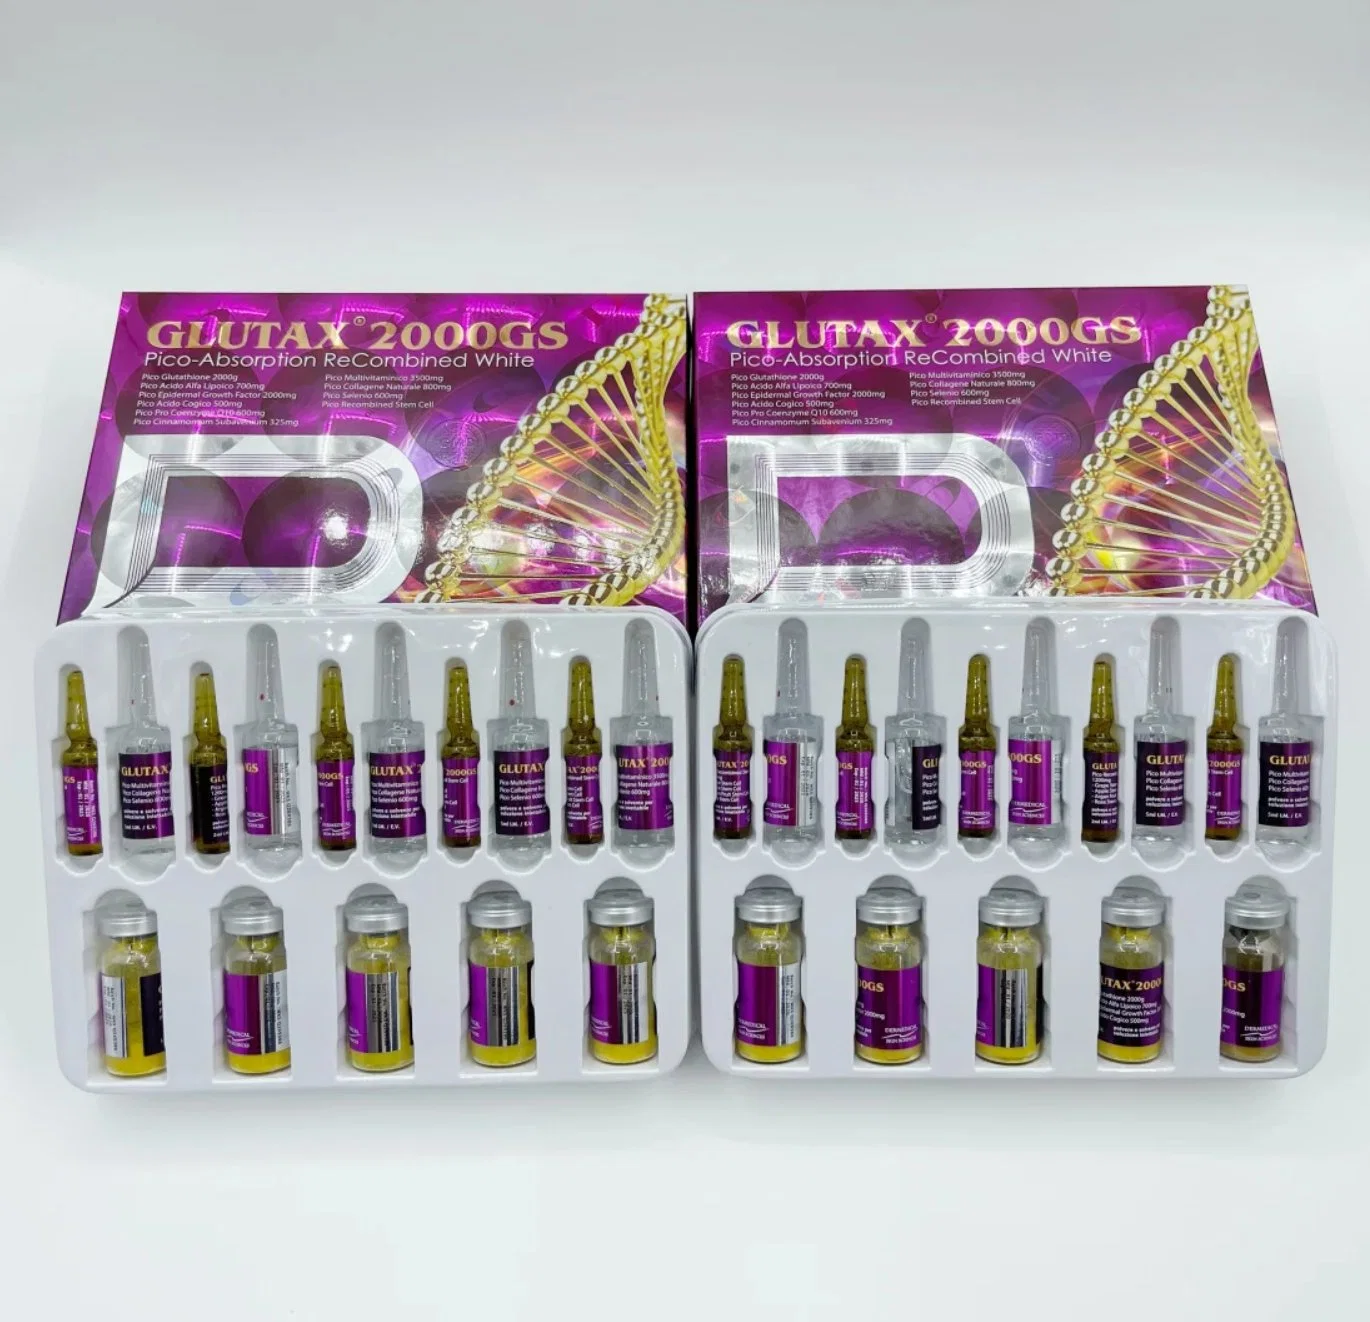 Italy Brand Hot Selling Glutax 2000GS Skin Whitening Injection Glutax 70000GM Glutax 1800000GS Glutathione Injection